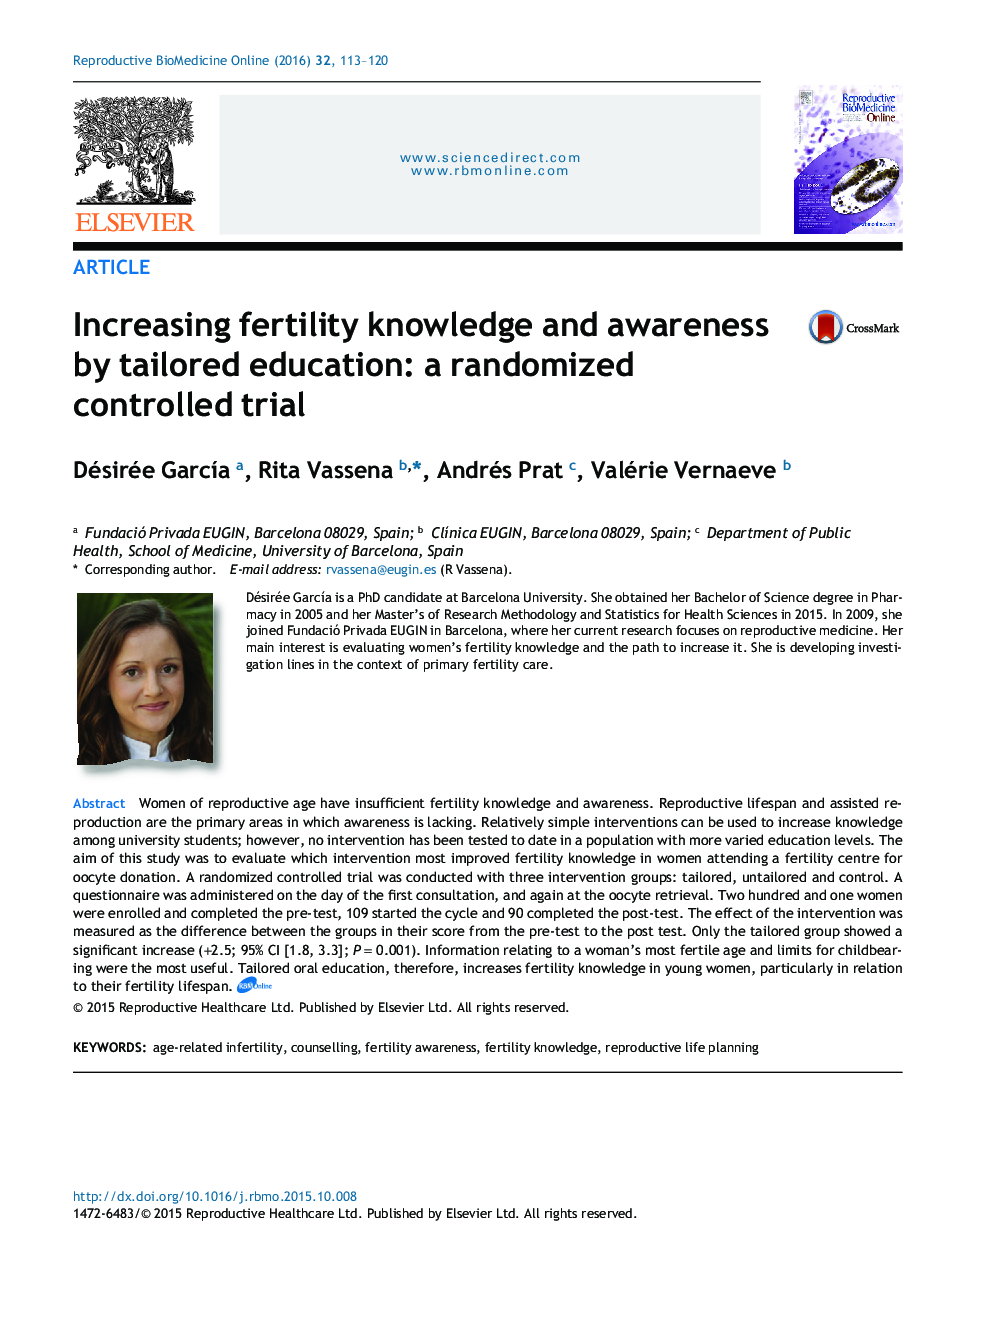 Increasing fertility knowledge and awareness by tailored education: a randomized controlled trial